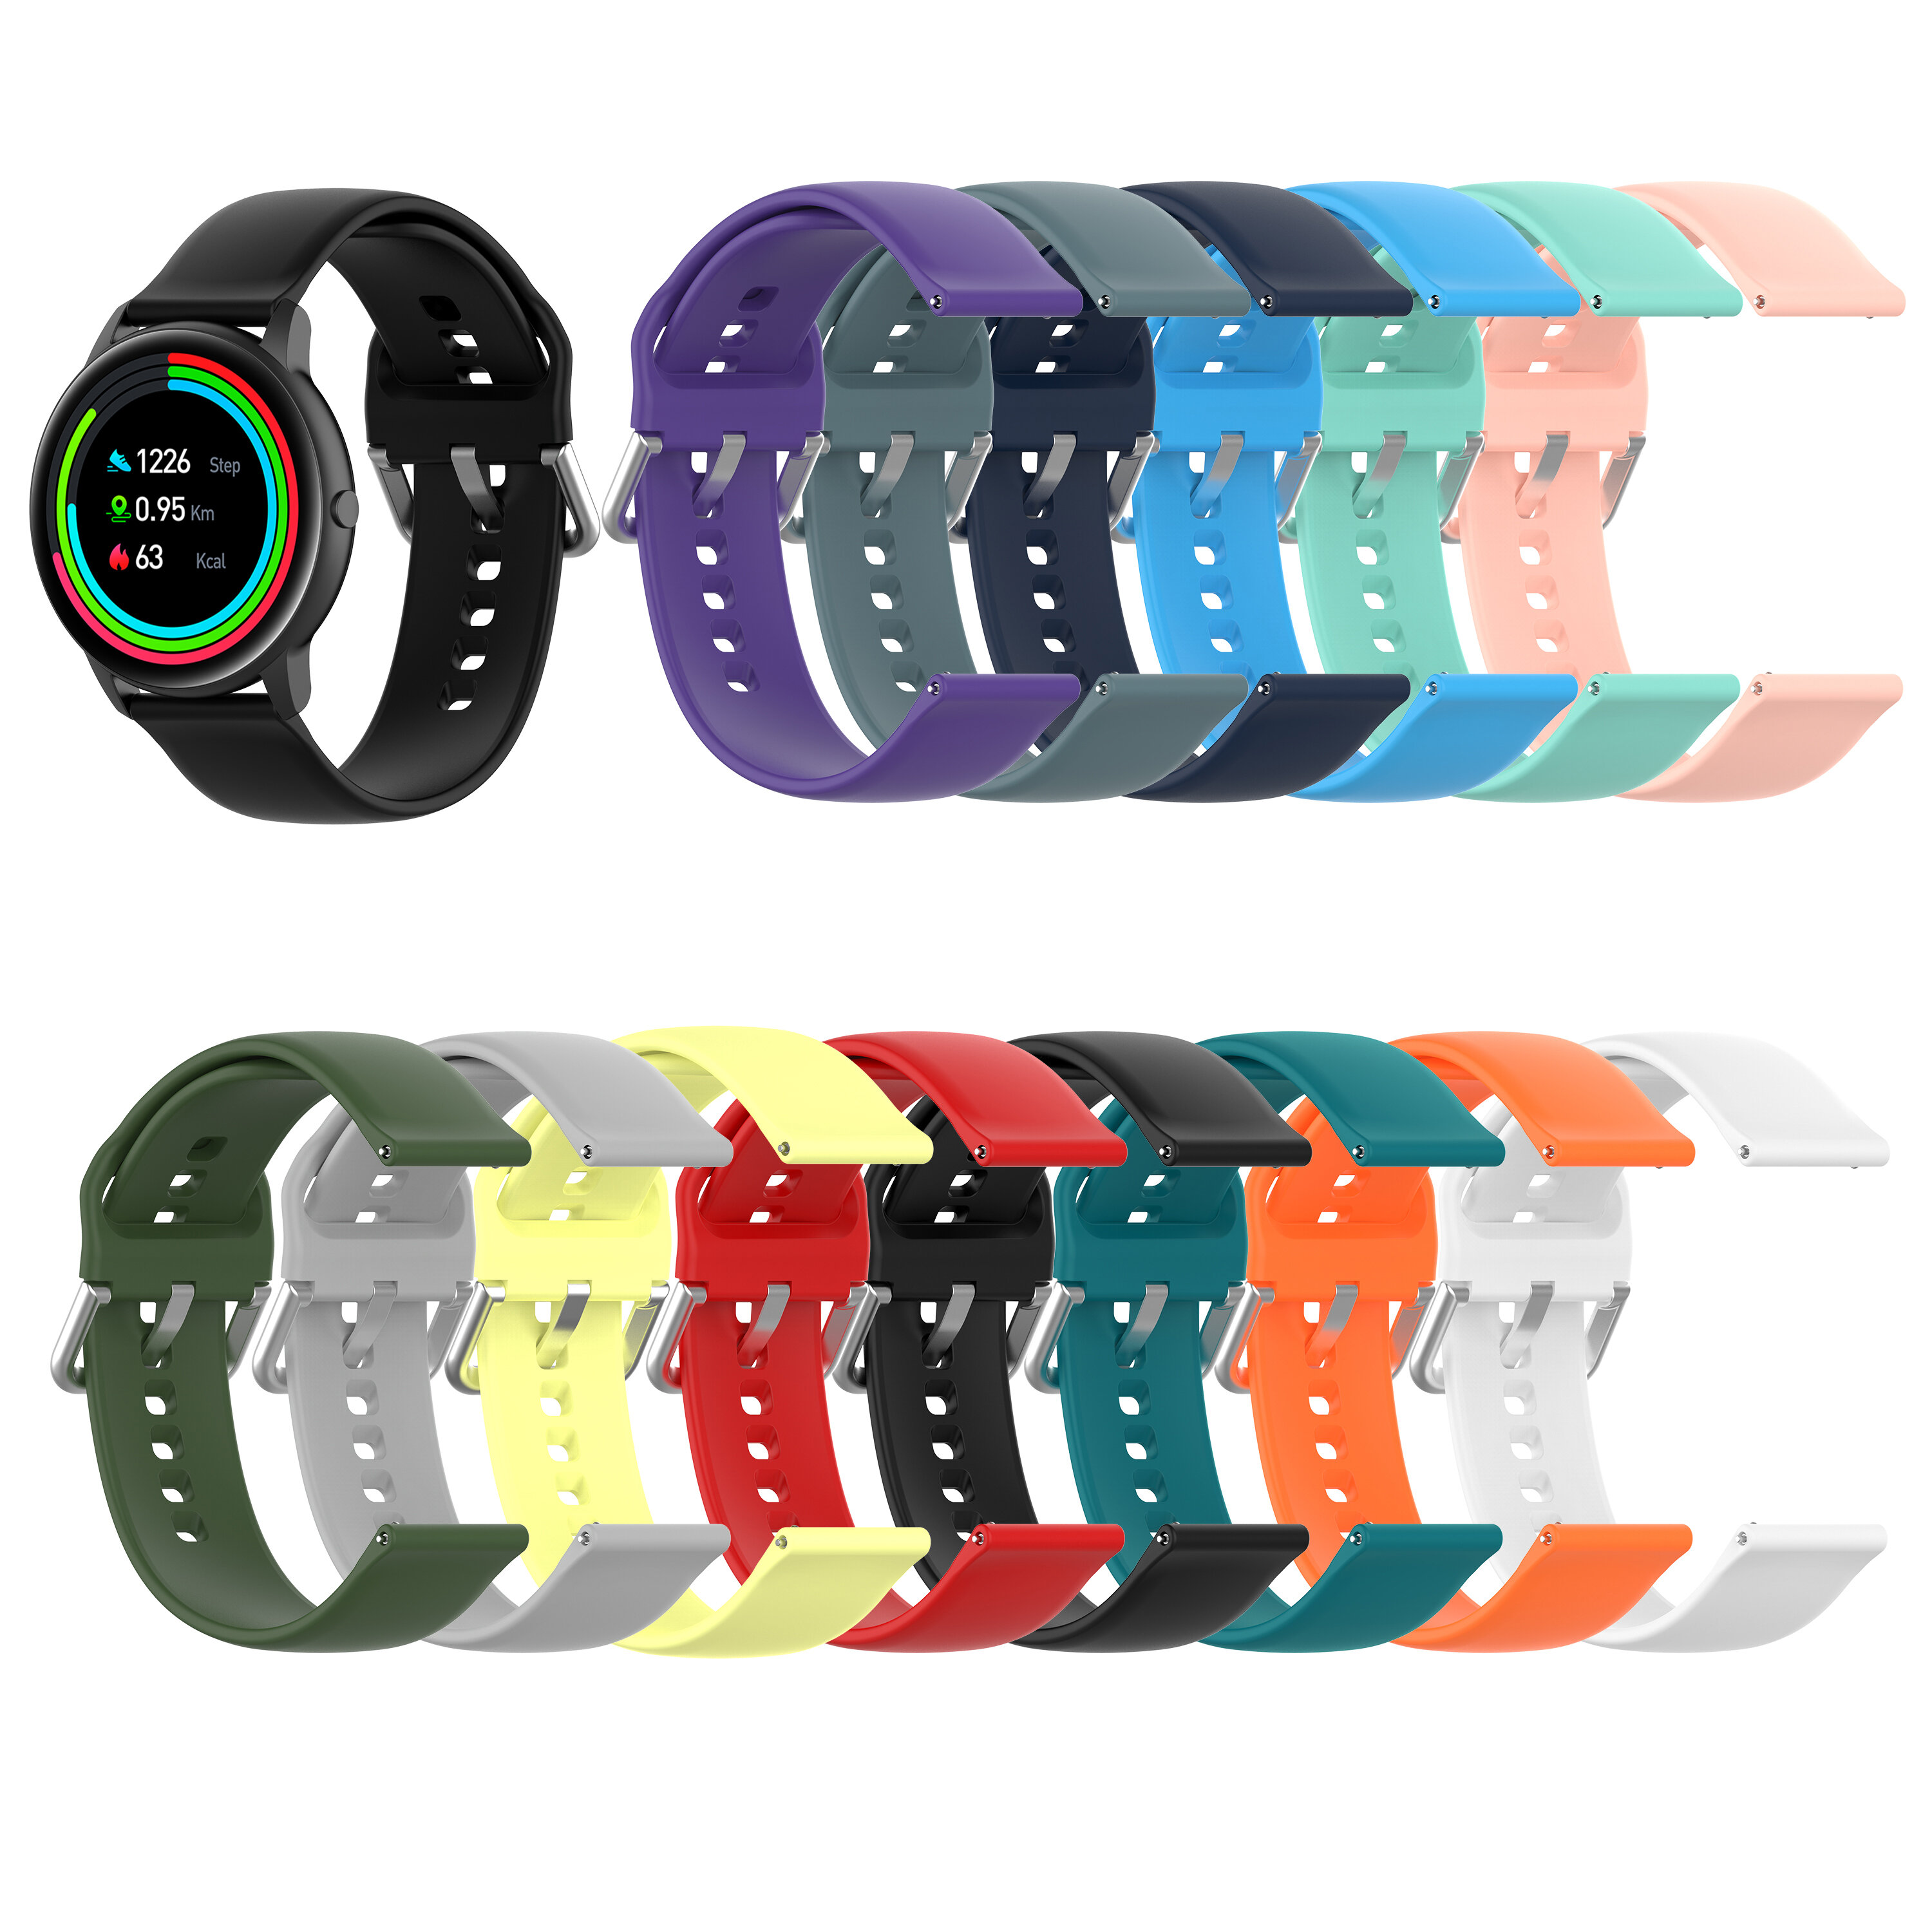 [Multi-Color to Choose] Bakeey Comfortable Soft Silicone Watch Band Strap Replacement for Xiaomi Haylou RT LS05S/ Haylou Solar LS05/ YAMAY SW022/ Imilab KW66